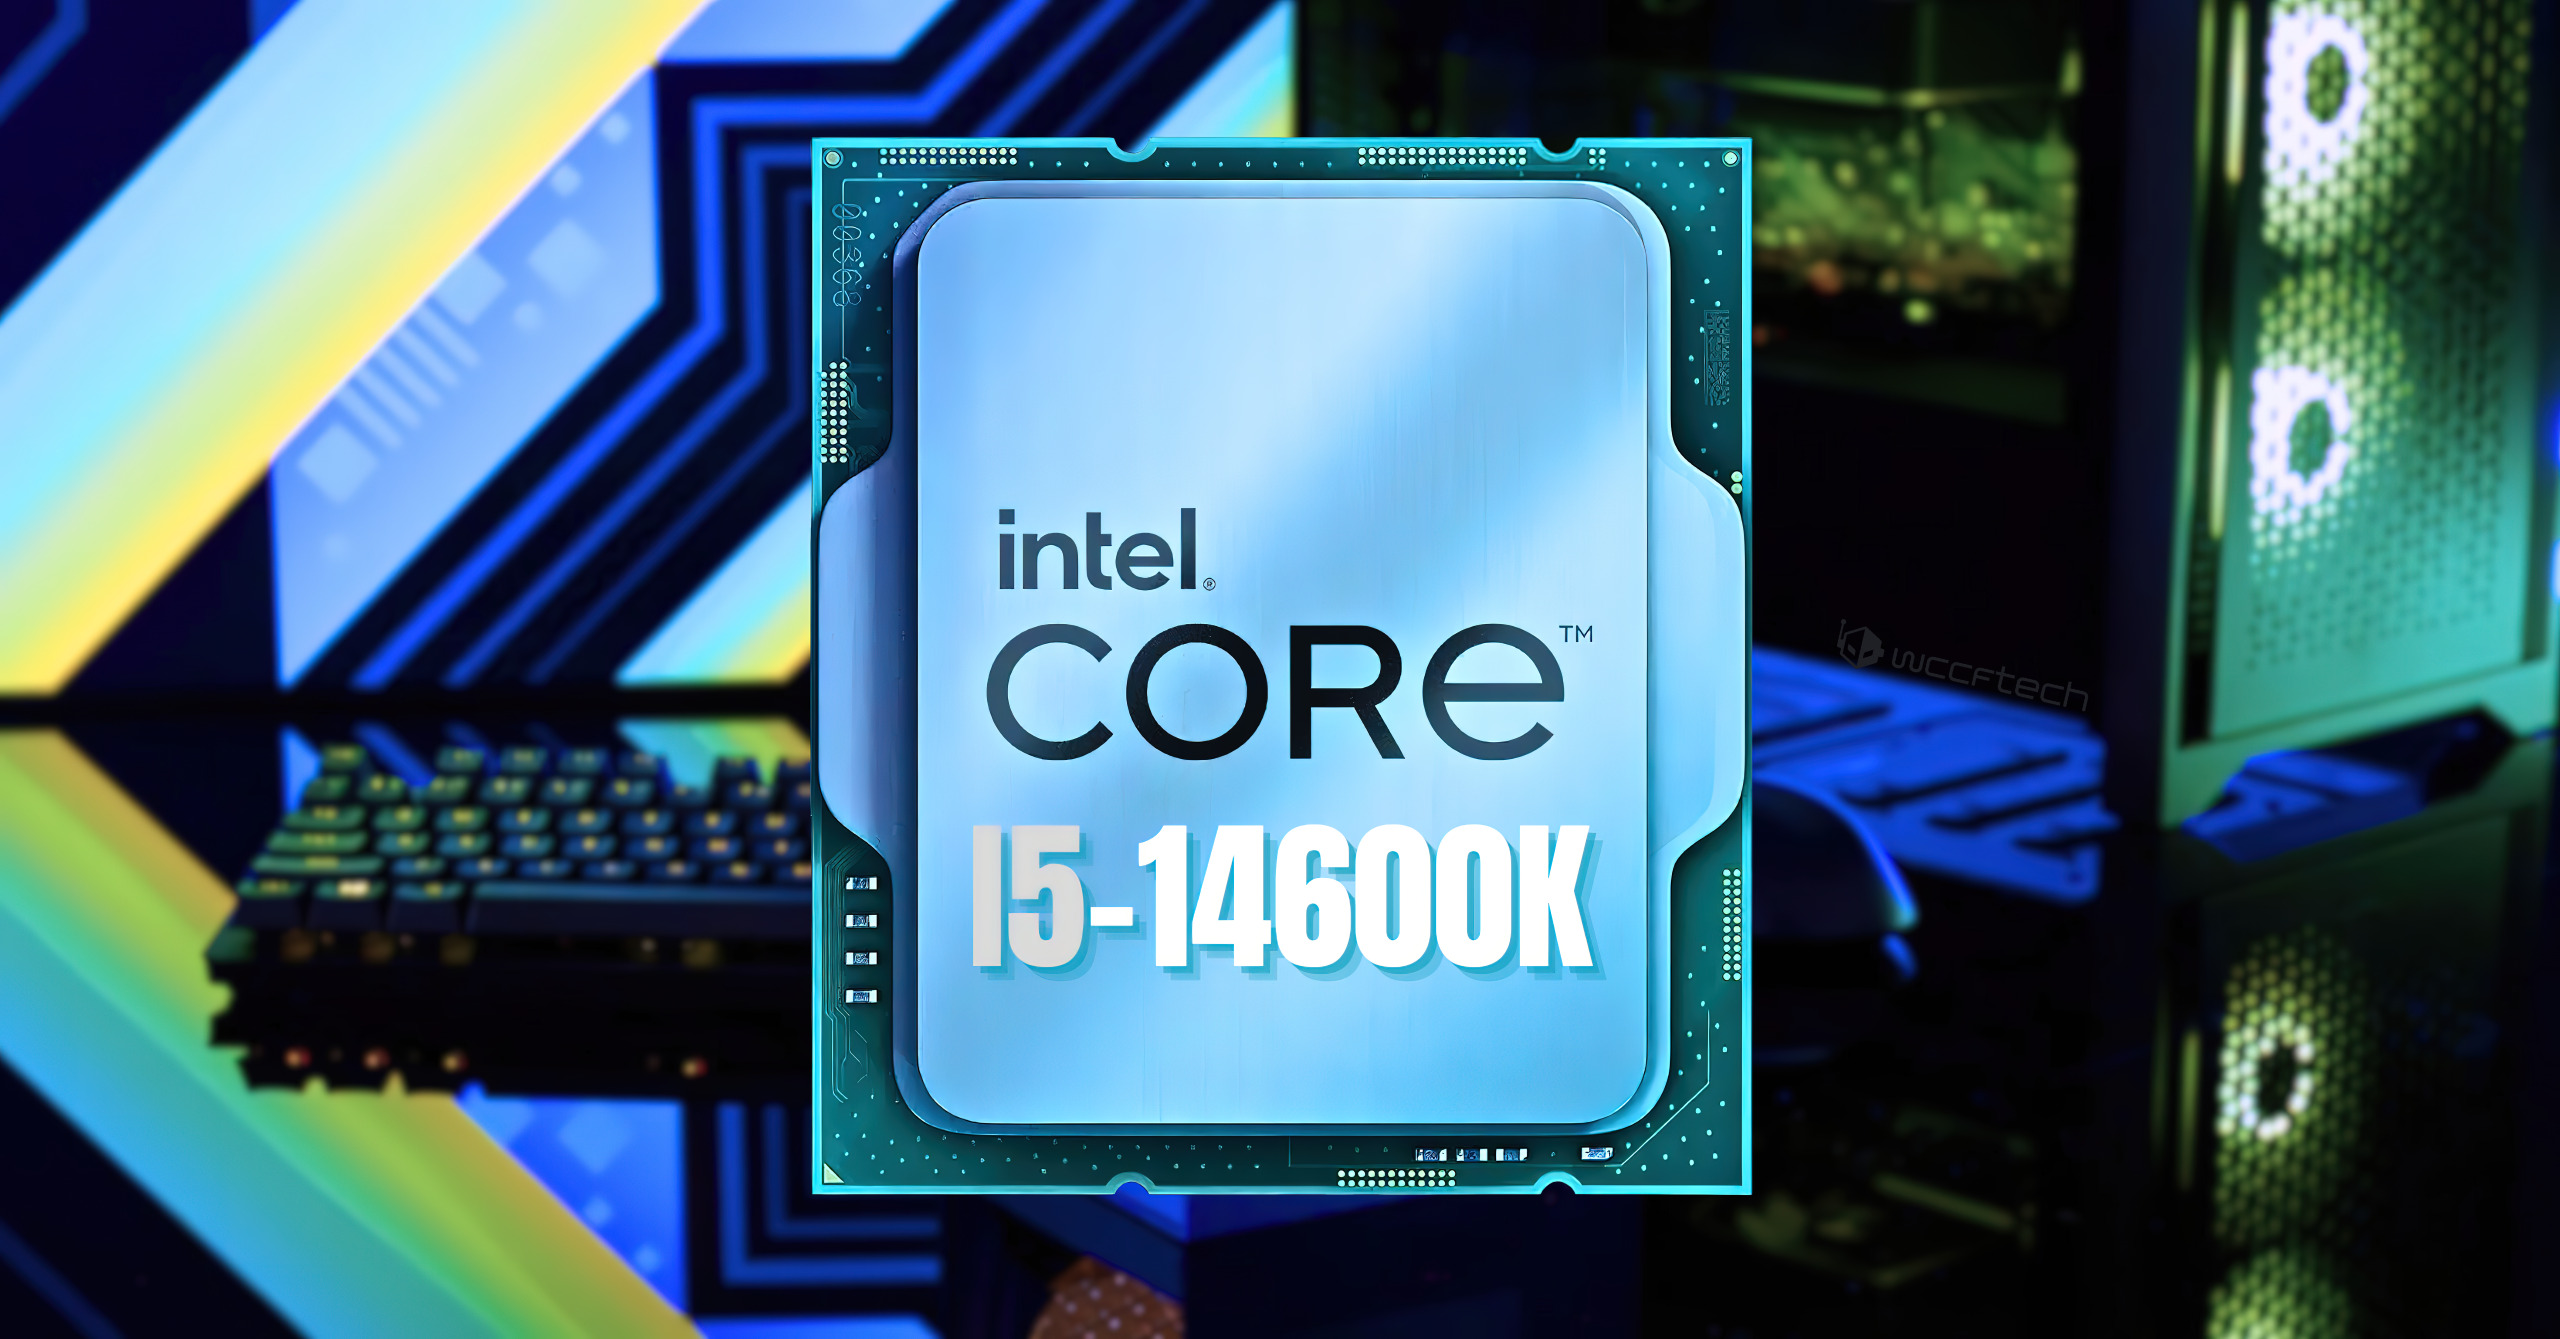 Intel's new Core i5-14600KF benchmarked: 5.5% faster than Core i5-13600K in single-core tests